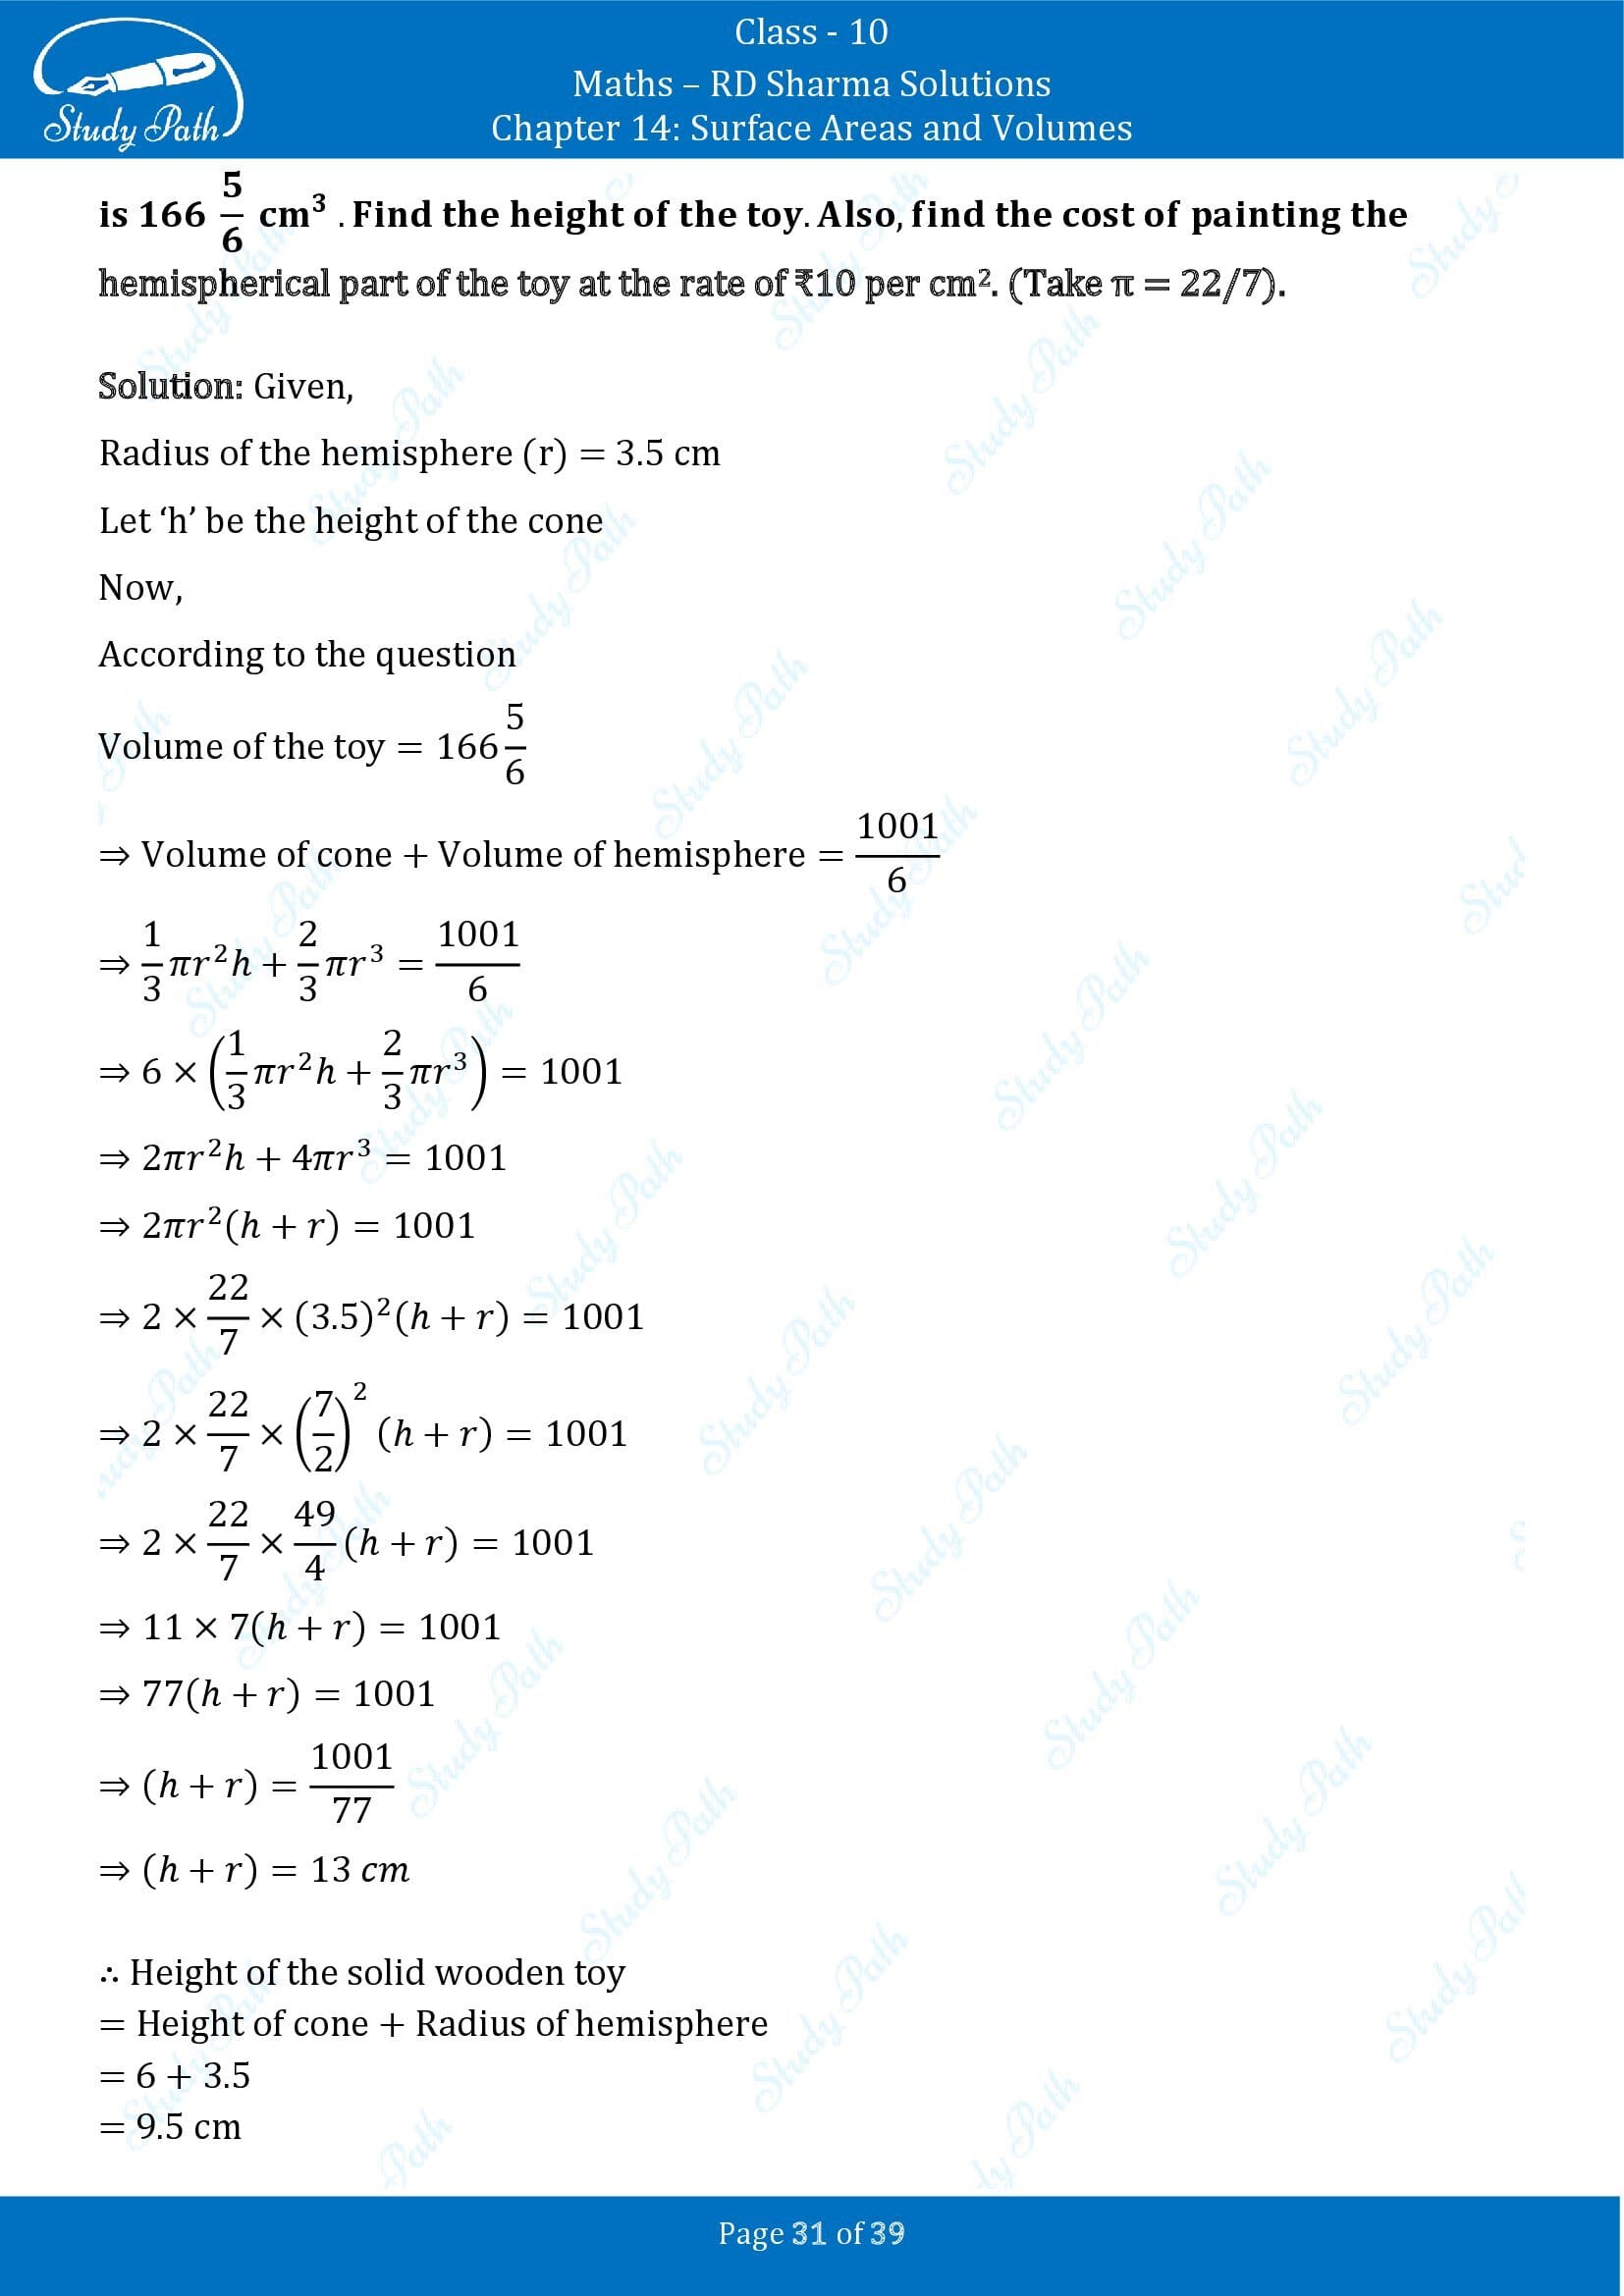 RD Sharma Solutions Class 10 Chapter 14 Surface Areas and Volumes Exercise 14.2 00031